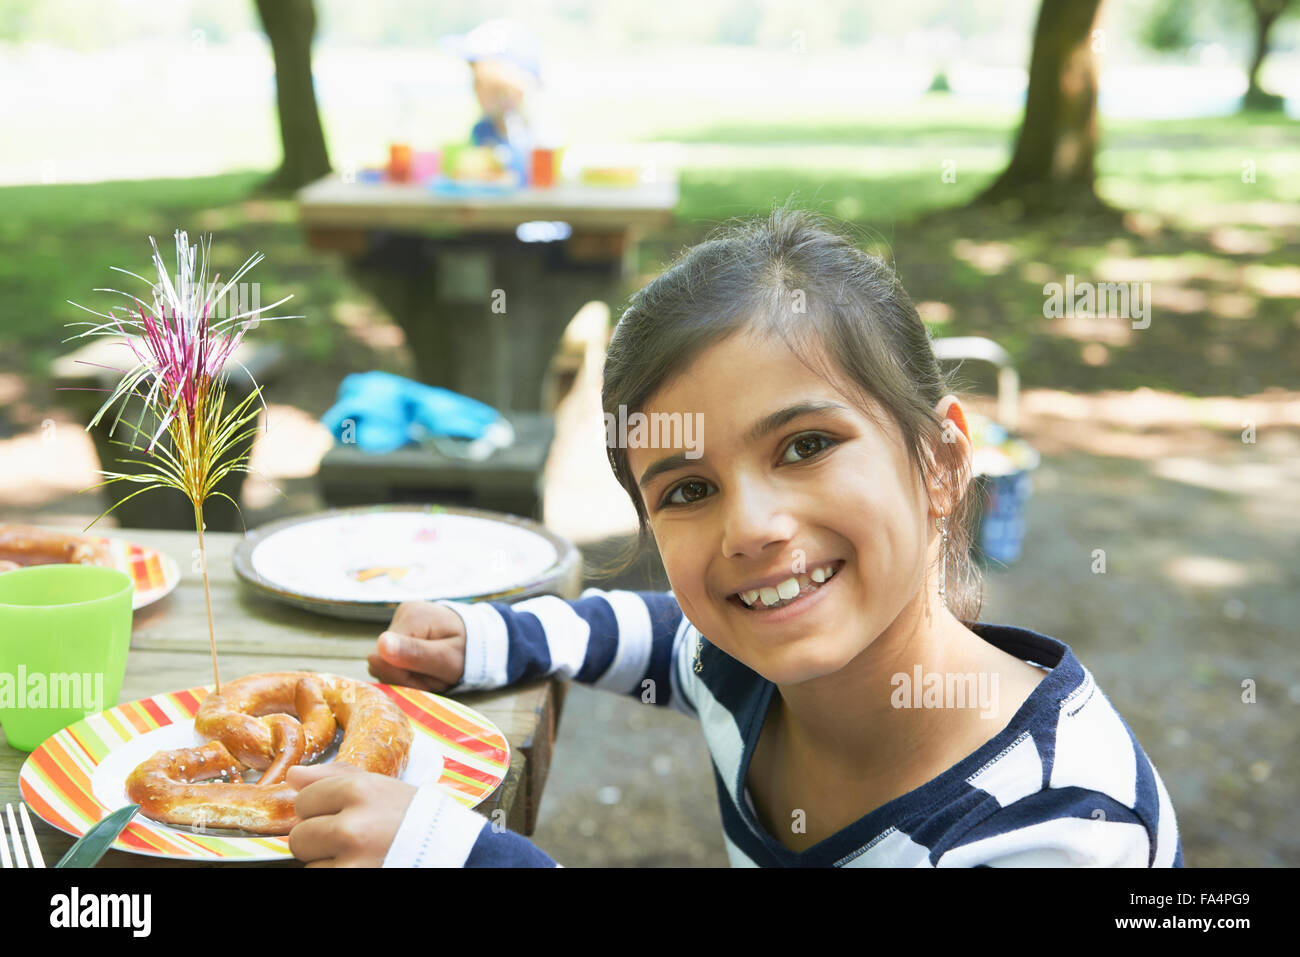 Portrait of a girl eating food at picnic, Munich, Bavaria, Germany Stock Photo